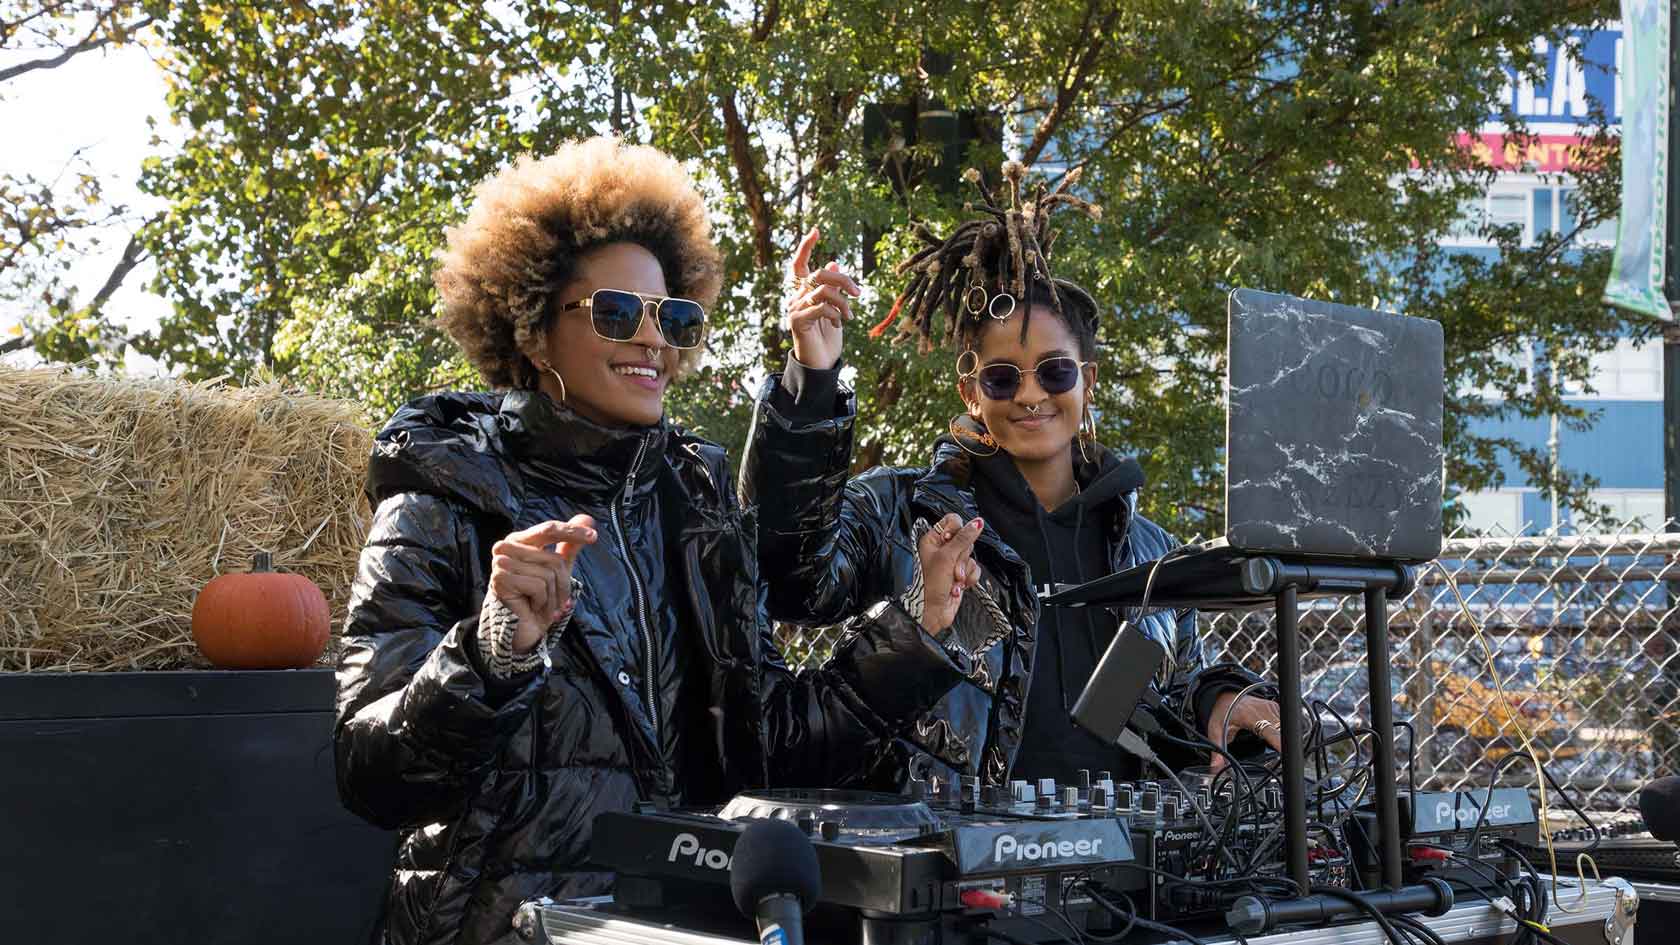 DJ's Coco and Breezy dressed in black jackets play music for the crod